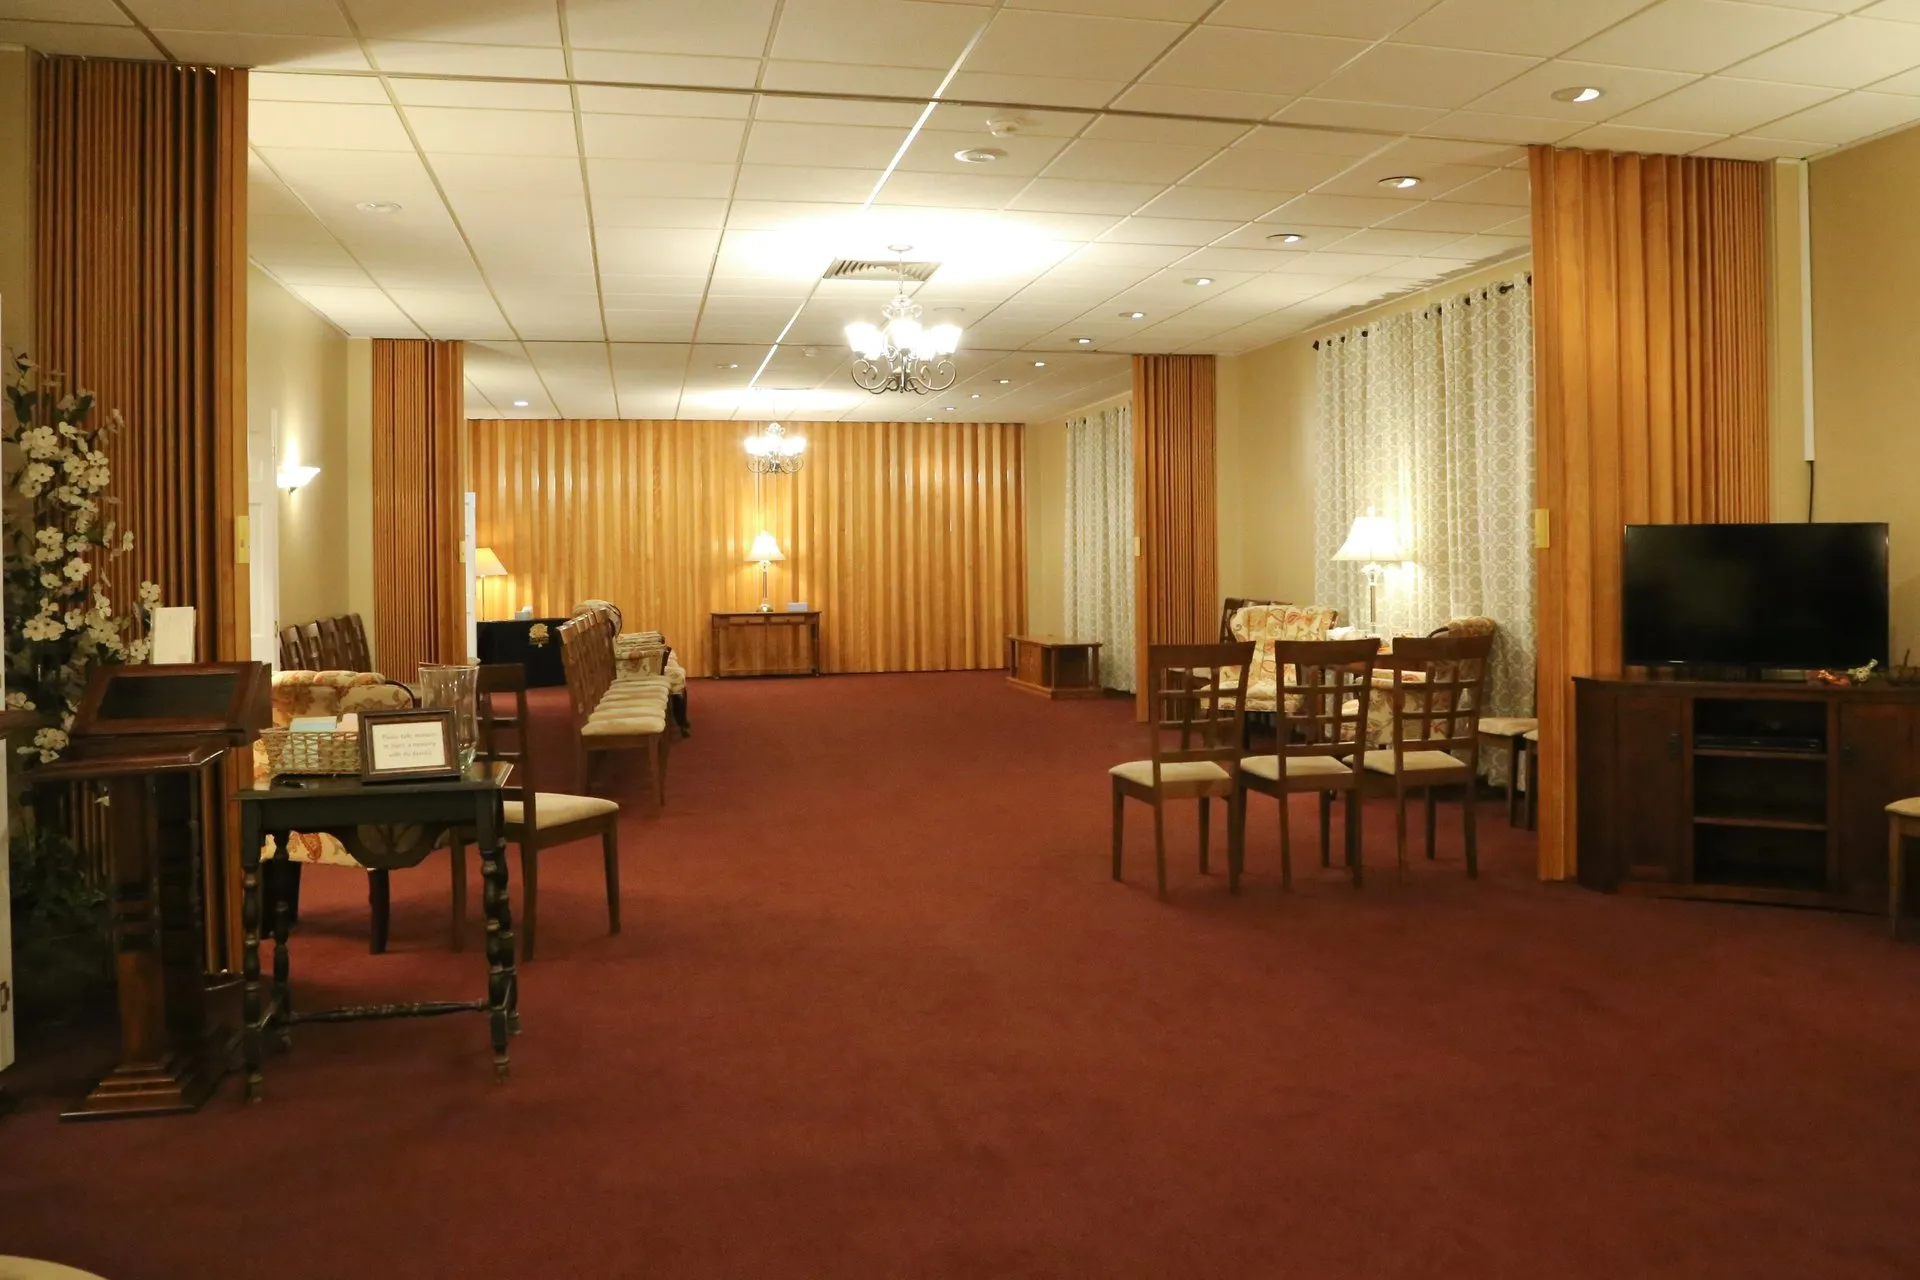 funeral home facilities room with wooden chairs